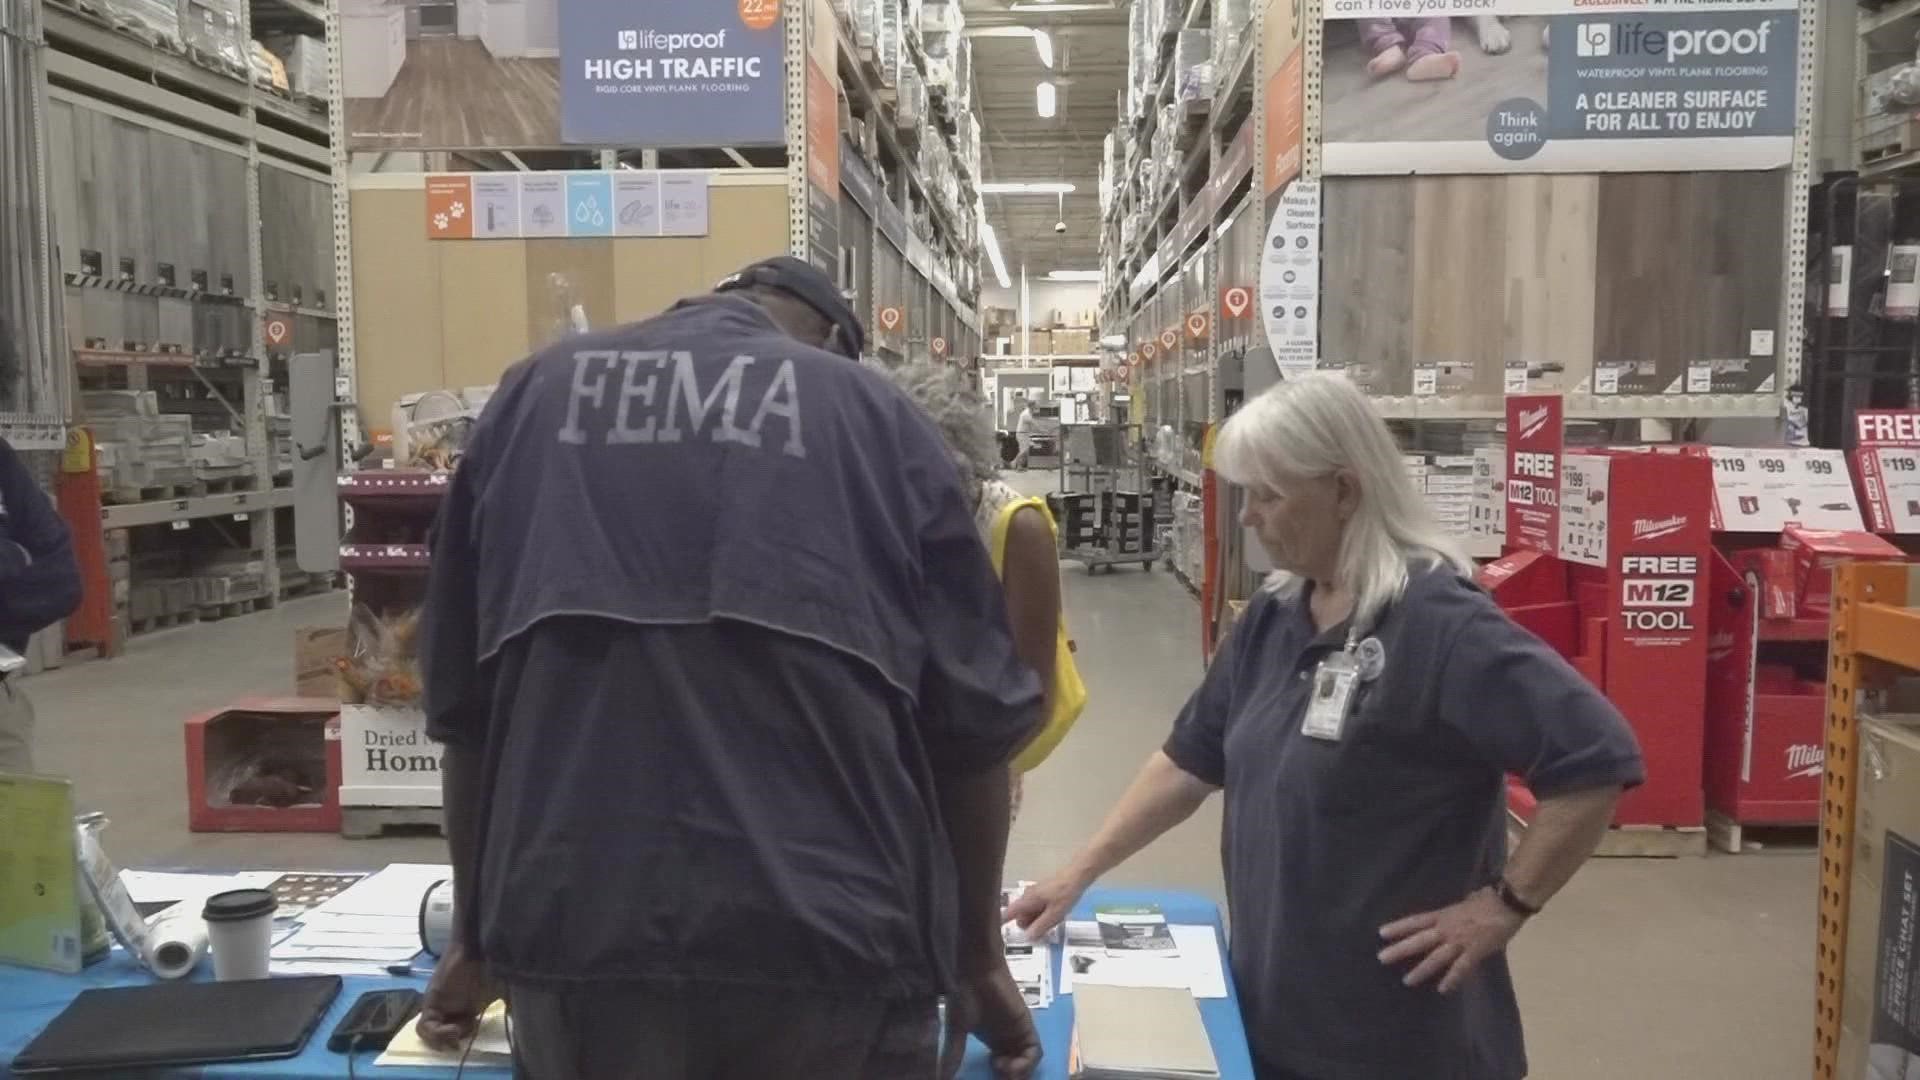 FEMA is providing free information to people about how to make their home better able to combat the next severe storm.